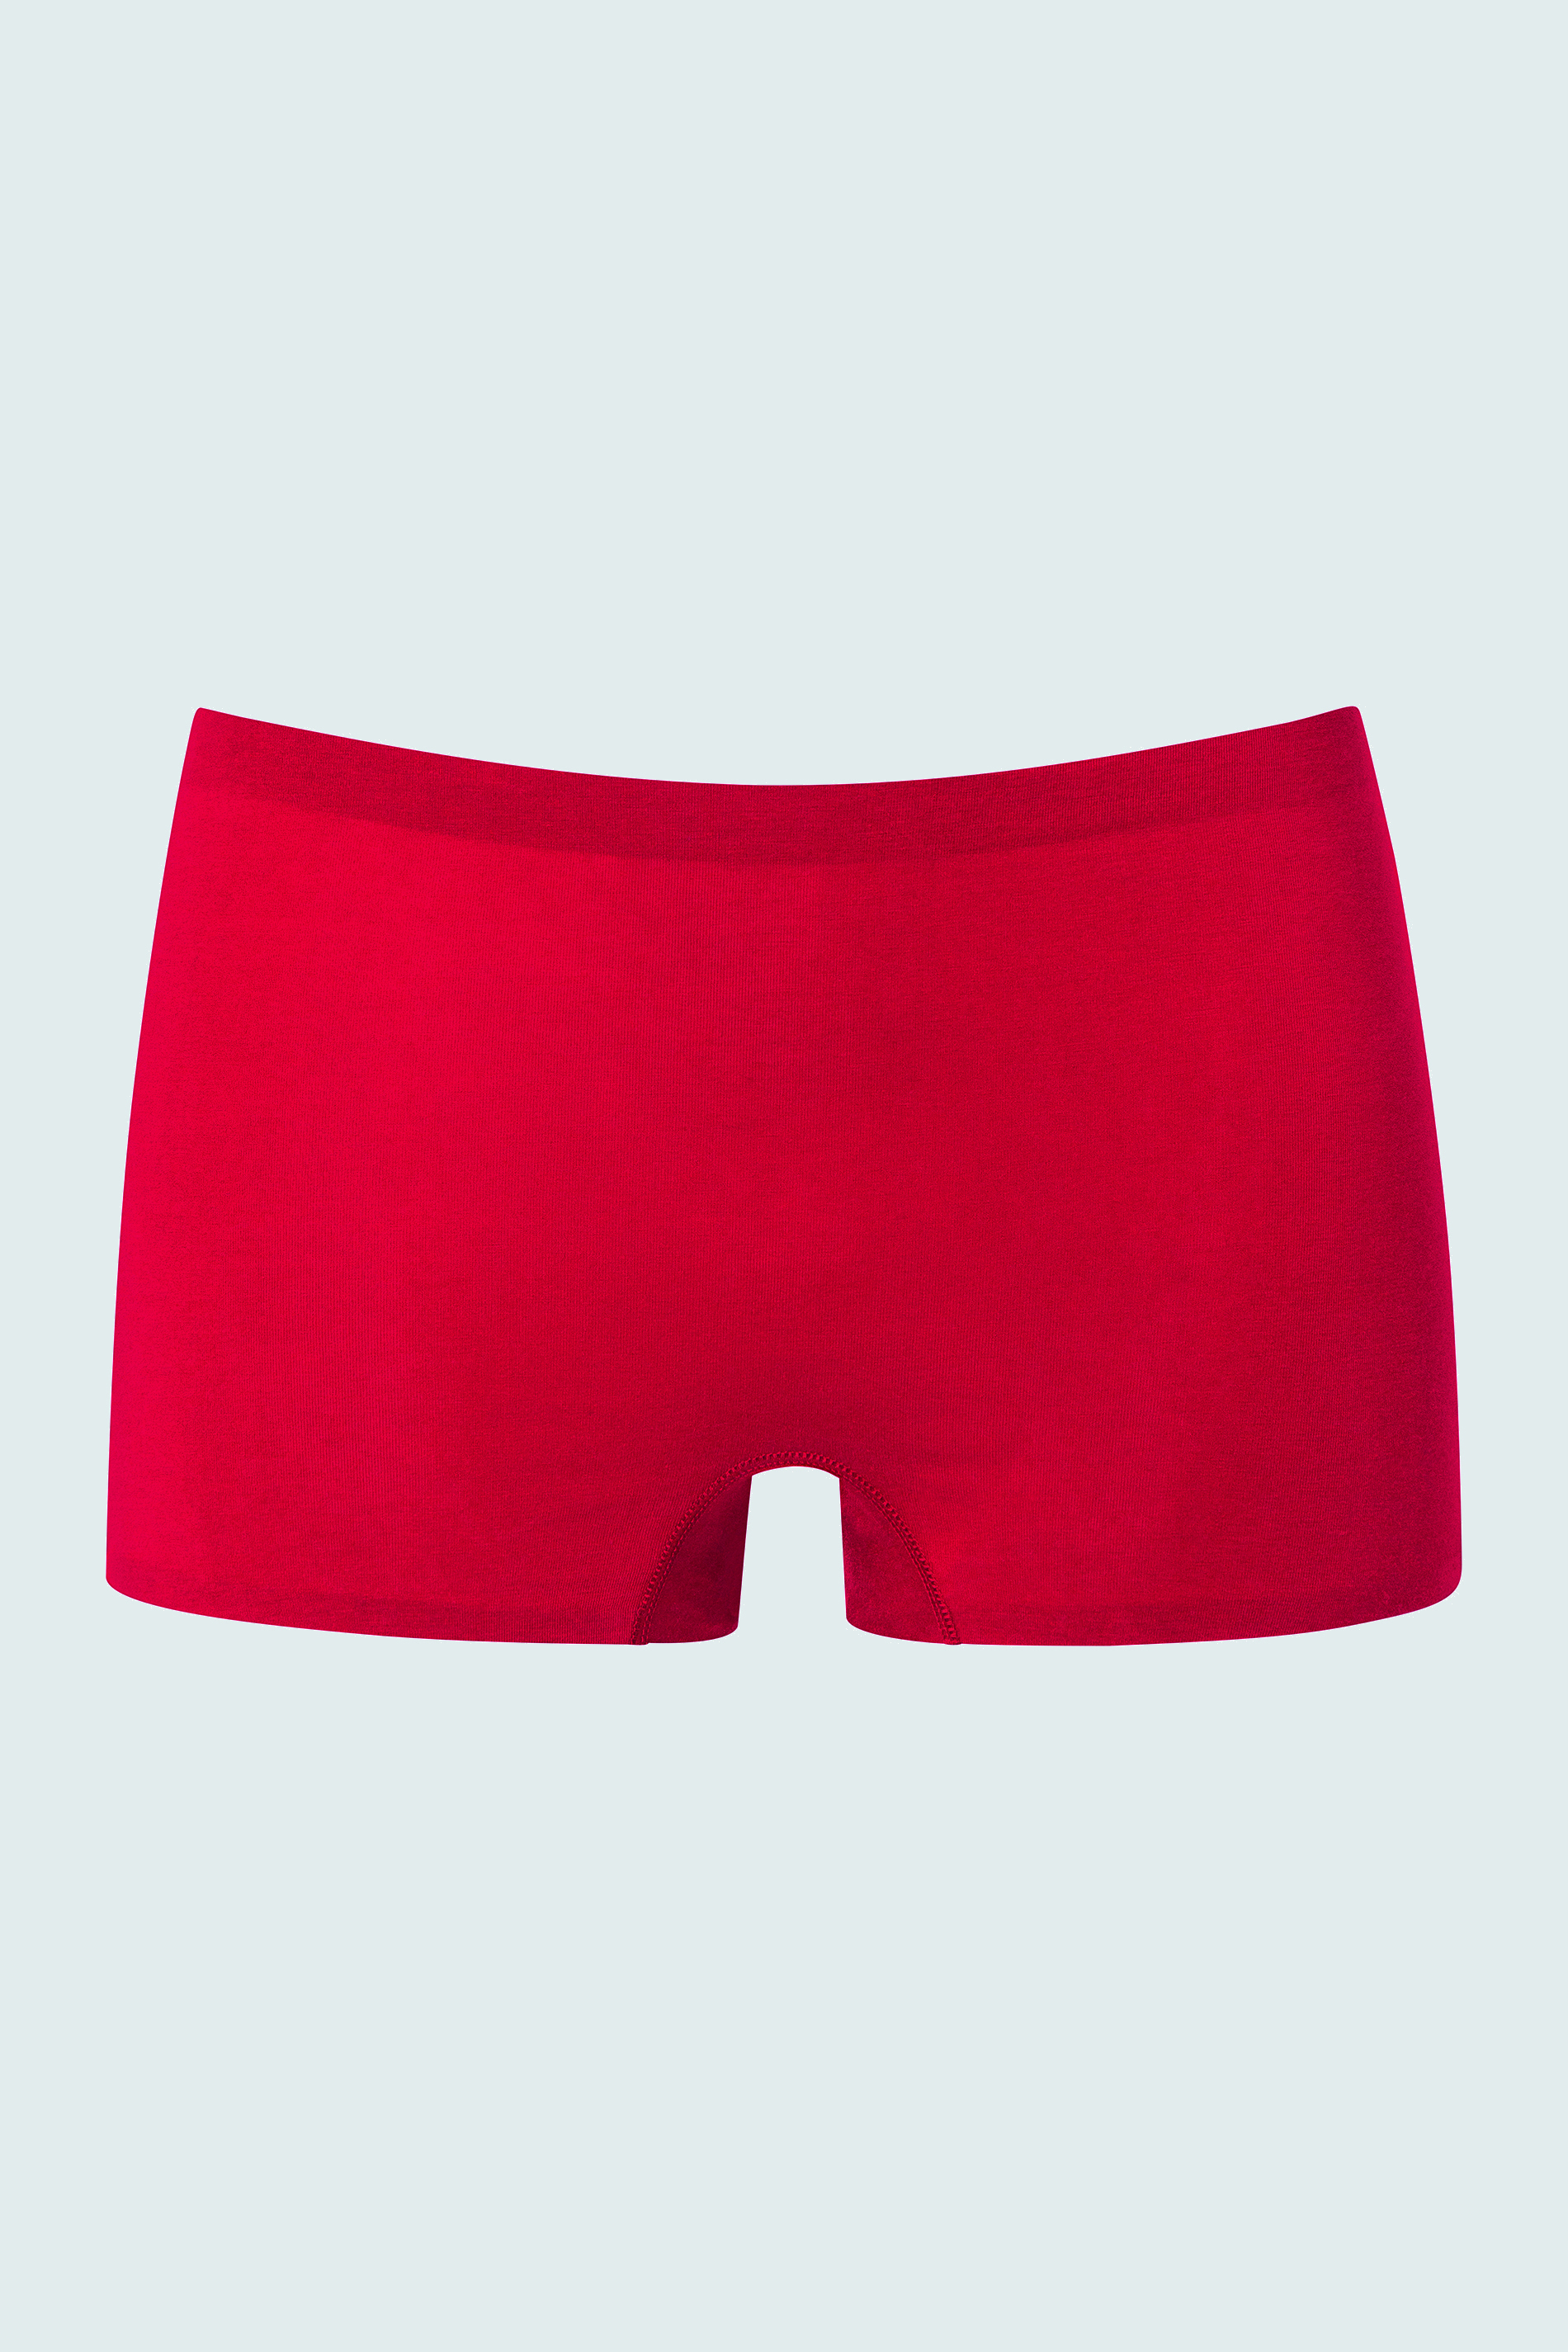 Shorts Rubin Serie Natural Second me Uitknippen | mey®